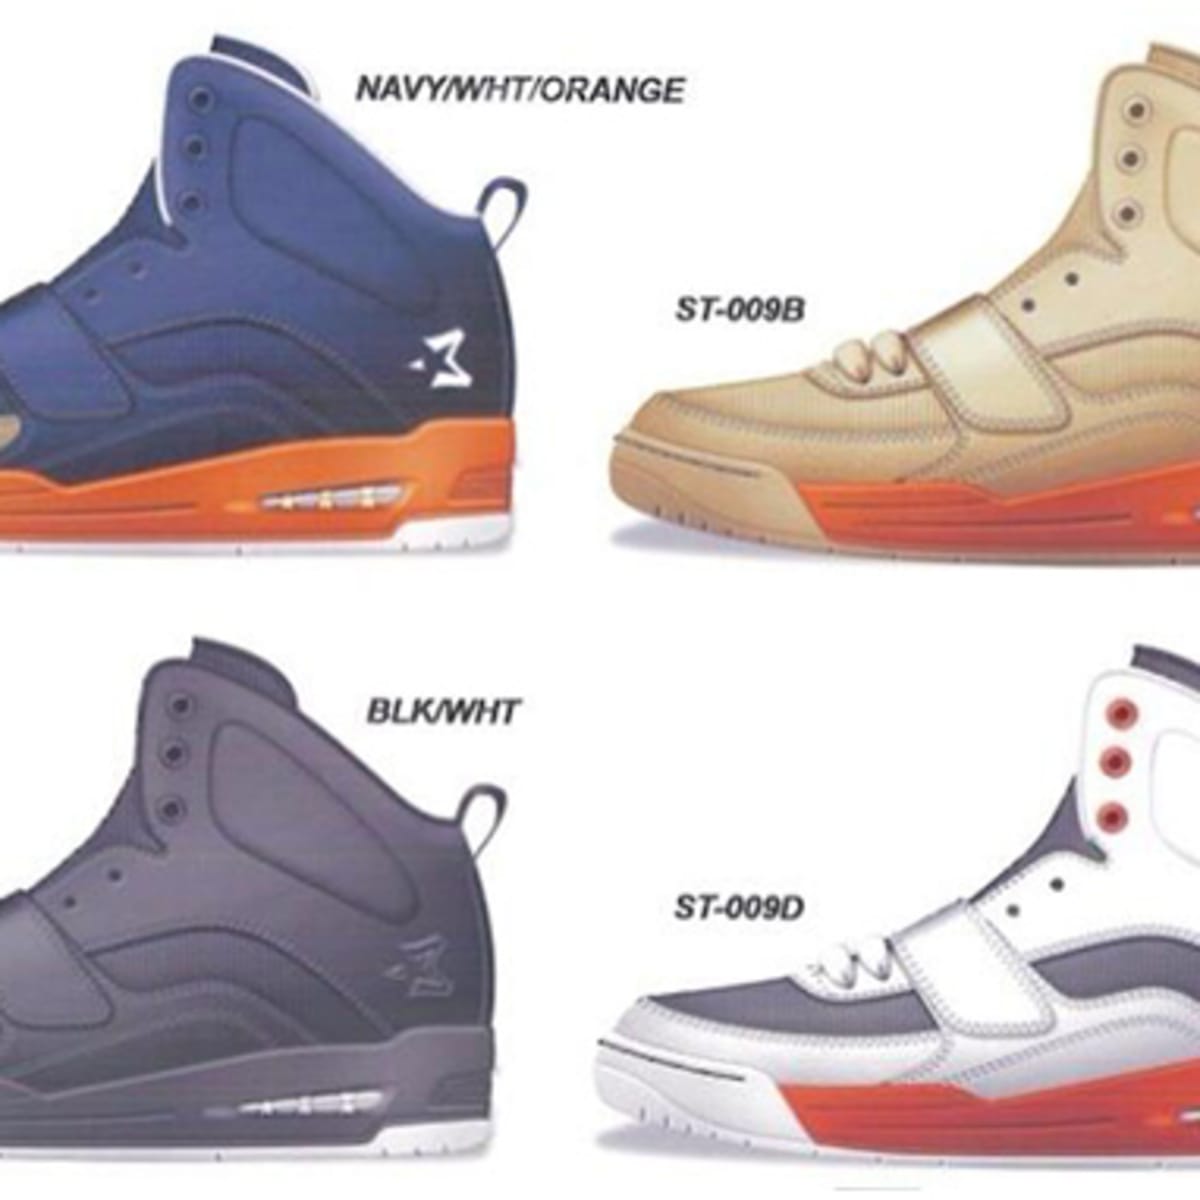 Stephon Marbury Relaunches $15 Sneaker, Calls Out Jordan for